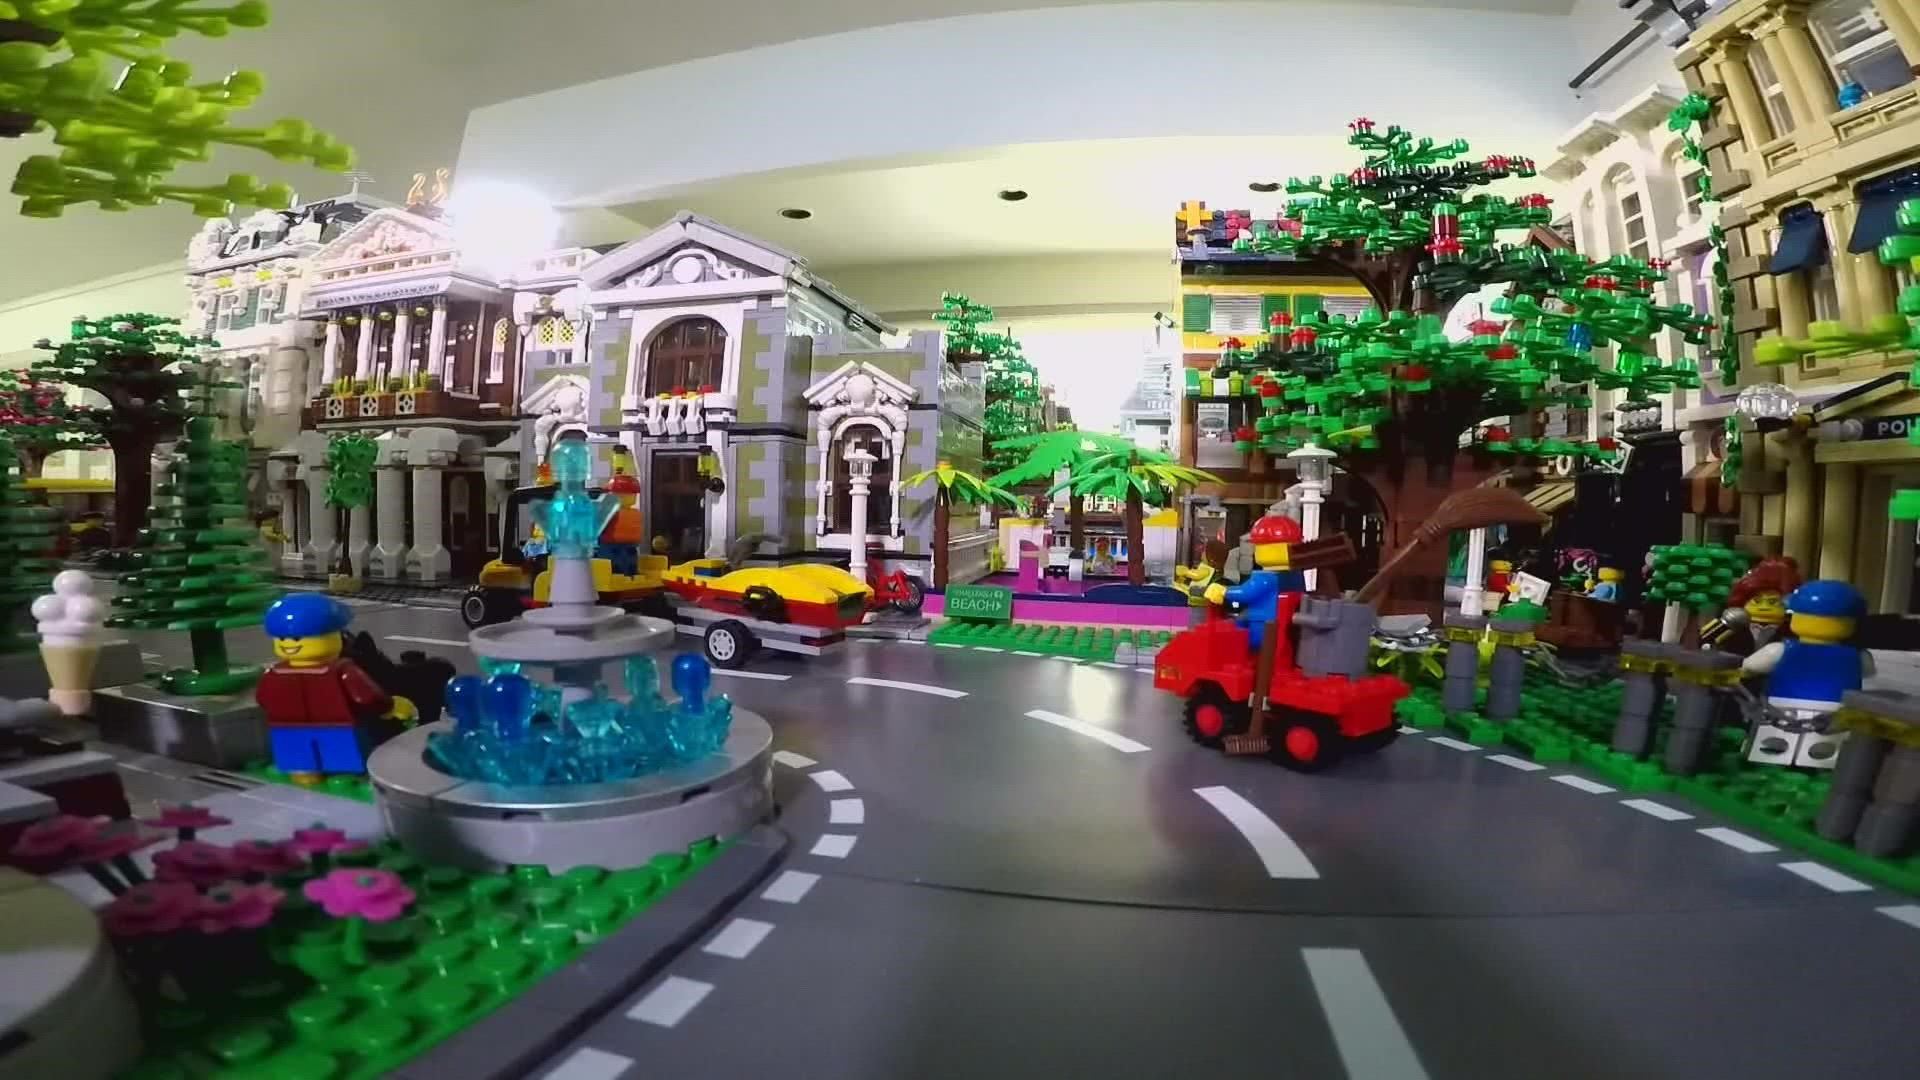 Lego video on goes viral | wfaa.com